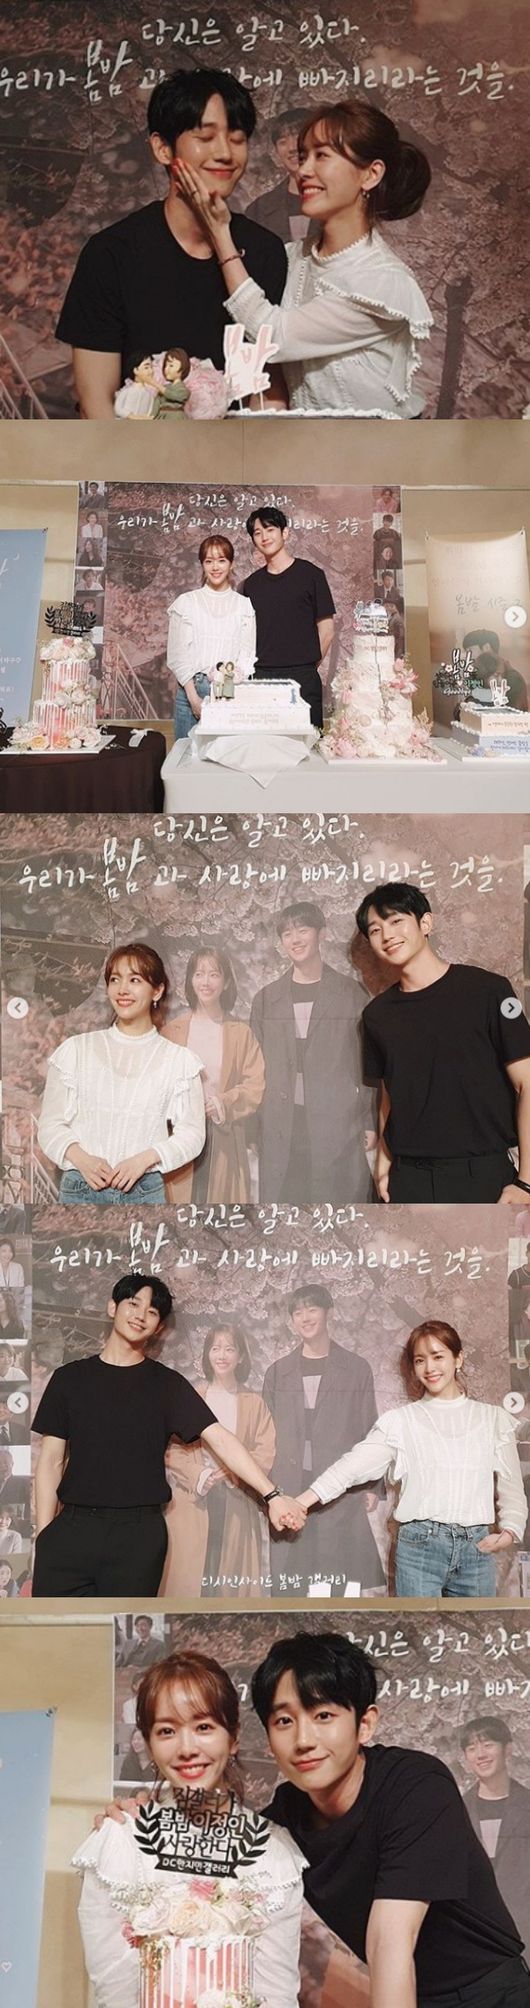 Actor Han Ji-min reminisced about the passing spring night.Han Ji-min posted photos of MBC drama Spring Night on the personal SNS on the 12th.Han Ji-min and Jung Hae-in in the photo commemorated the end of the work with various poses in front of the celebration cake sent by the staff and fans.The two people who reminded of their real lovers drew attention by reminding Lee Jung-in (Han Ji-min) and Yoo Ji-Ho (Jeong Hae-in) among the plays that were loved as reasonable couples.Han Ji-min said, Thank you for coming to Spring Night.As one spring brought Jiho and Jungin, warm love will come to everyone, he added. When spring comes, I remember each other.Spring Night is a melodrama depicting a story of a woman who is tired of a loose relationship with a long-time lover and a man who has lived with emotion restraint and has been suffering from a single daddy.It ended with 32 episodes (the last episode) broadcast on Wednesday night.